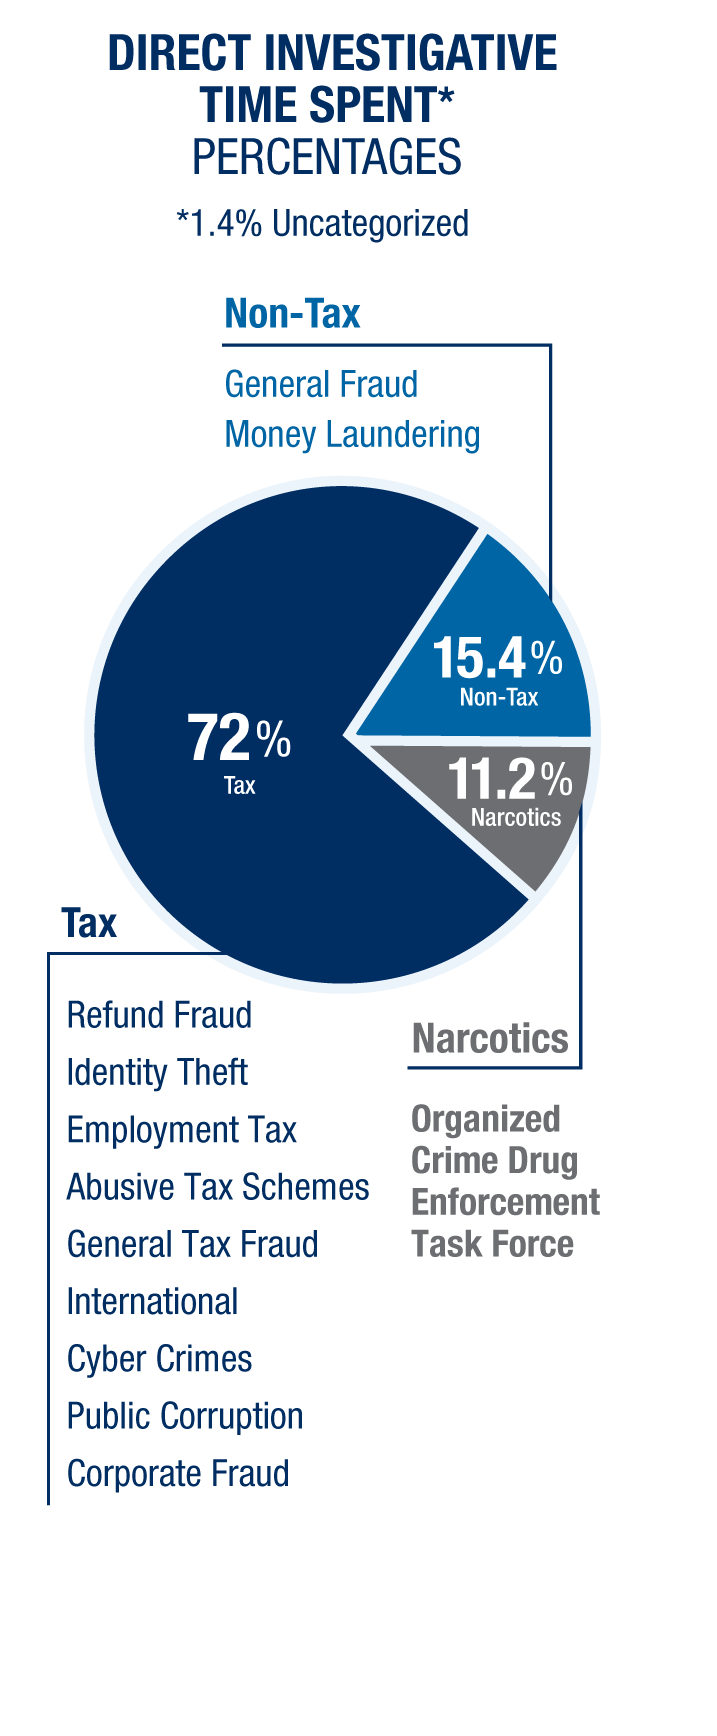 A graphic depicting the amount of time spent on criminal investigations